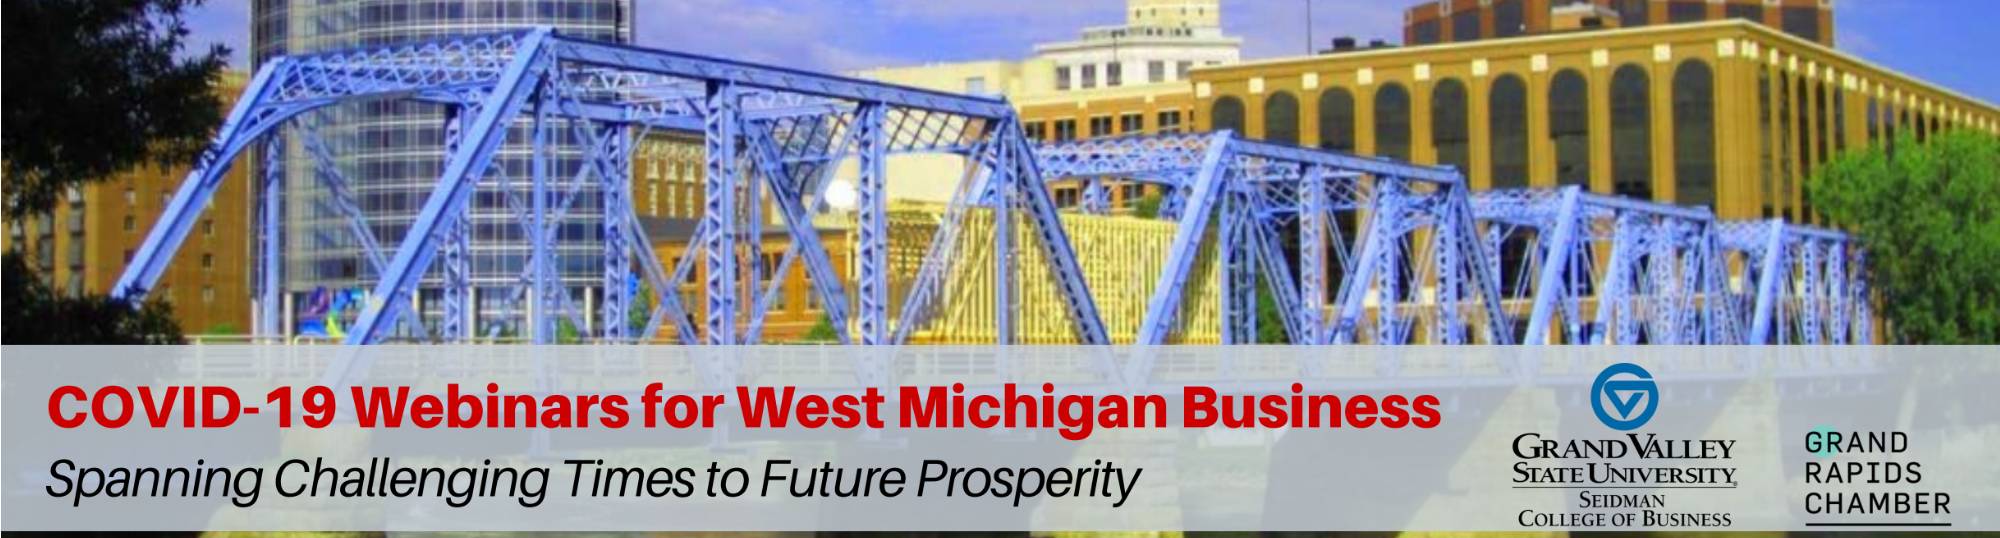 COVID-19 Webinars for West Michigan Business; spanning challenging times to future prosperity. Presented by GVSU Seidman College of Business and Grand Rapids Chamber